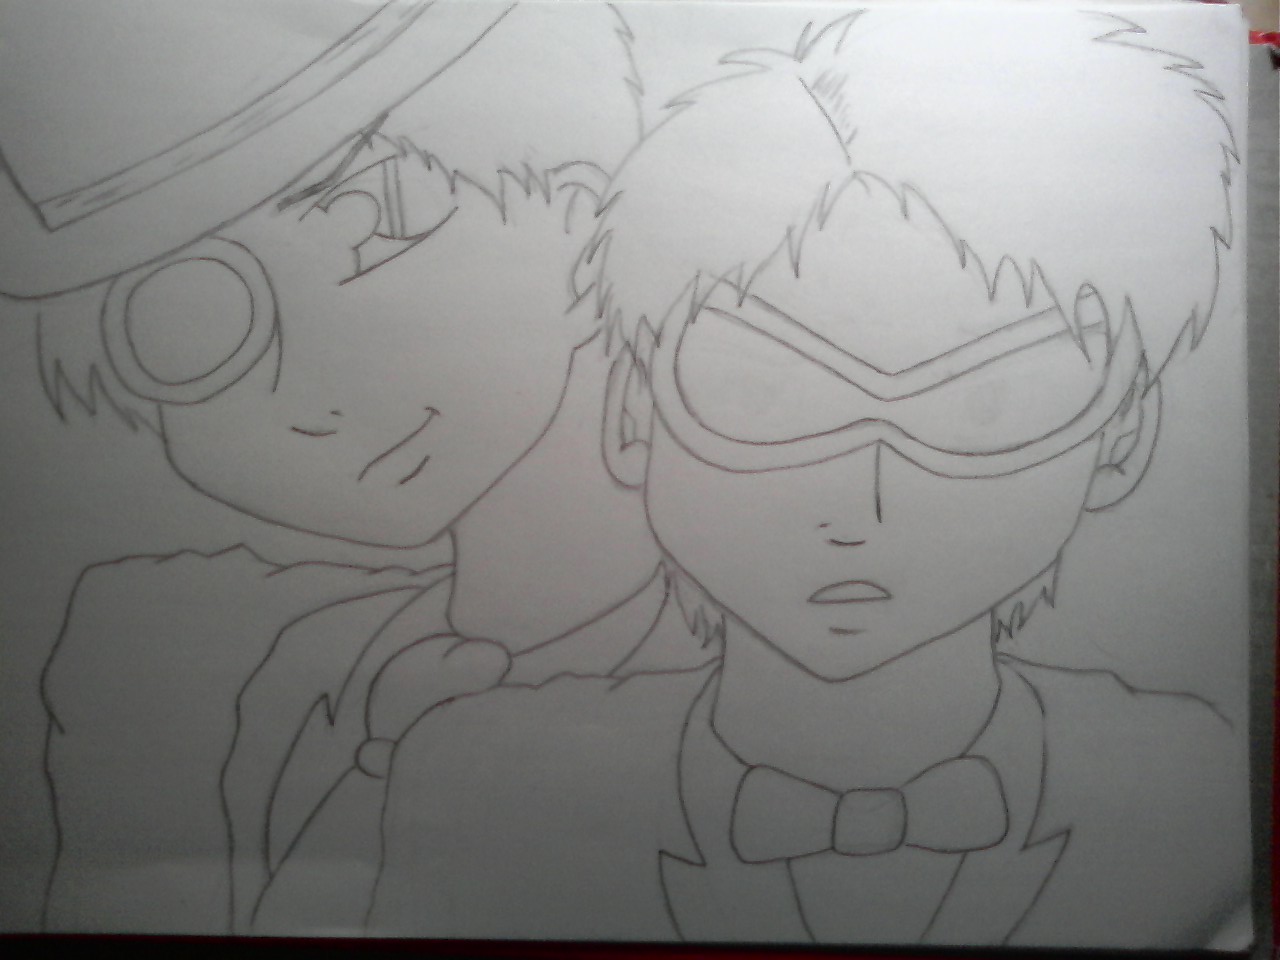 Kaito Kid & Tuxedo Mask  - request for NPG (unfinished) by idoodle